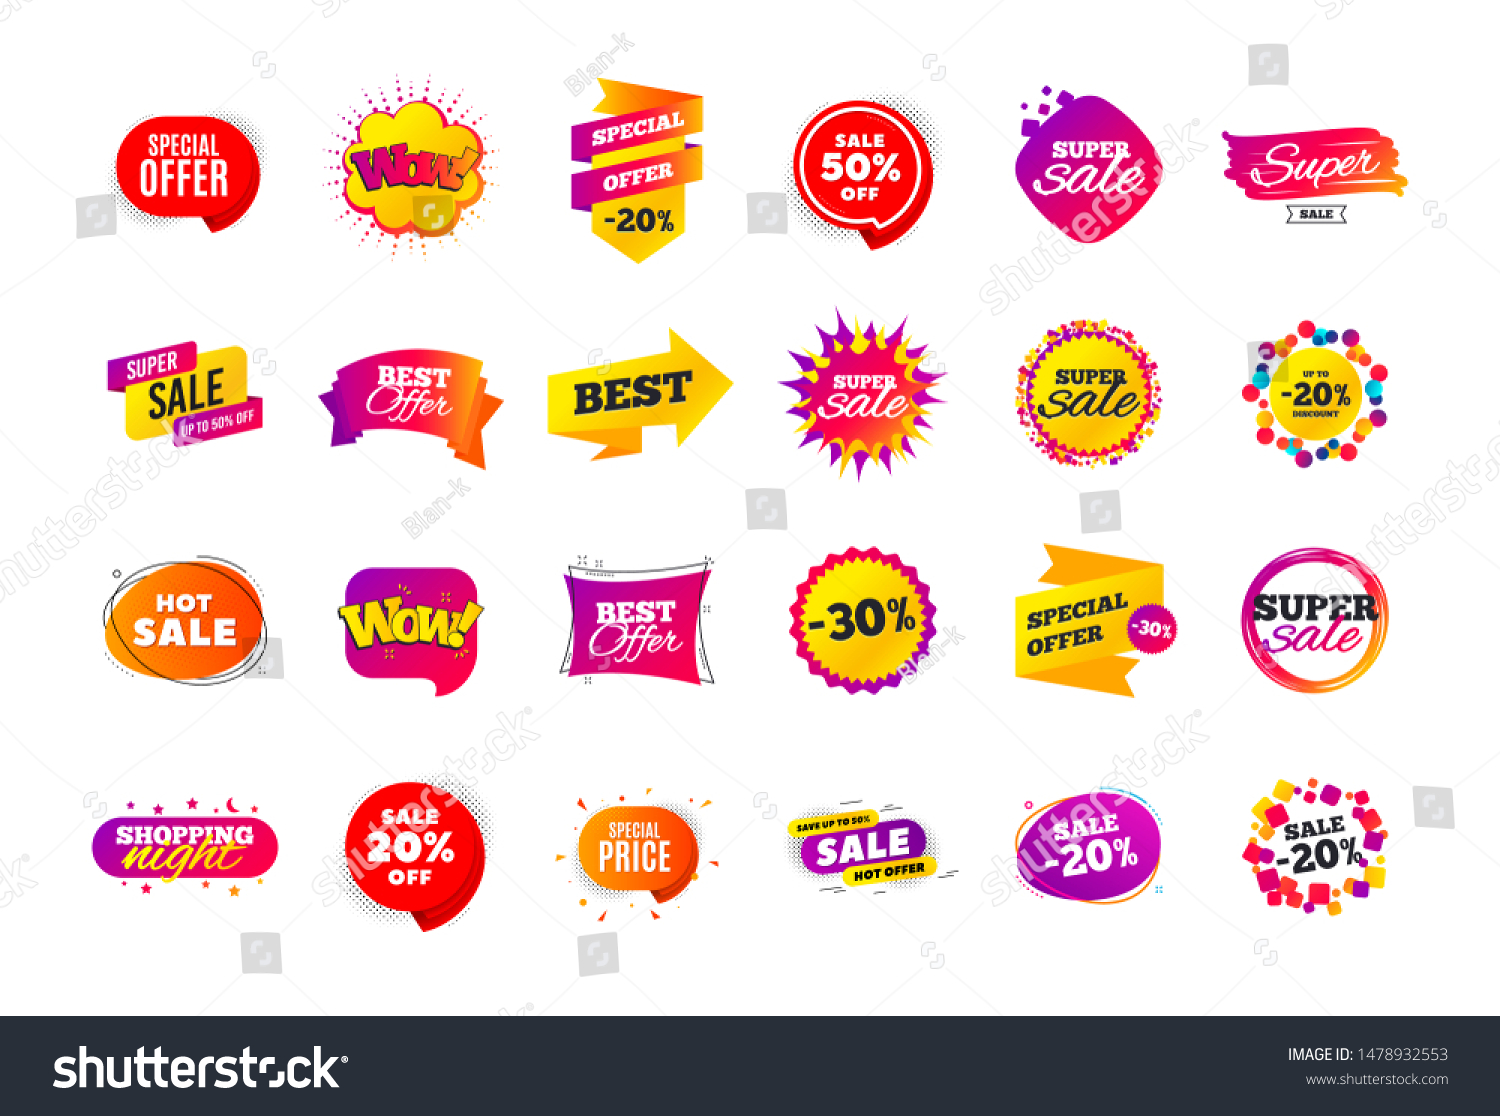 Sale banner badge. Special offer discount tags. Coupon shape templates design. Cyber monday sale discounts. Black friday shopping icons. Best ultimate offer badge. Super discount icons. Vector banners #1478932553